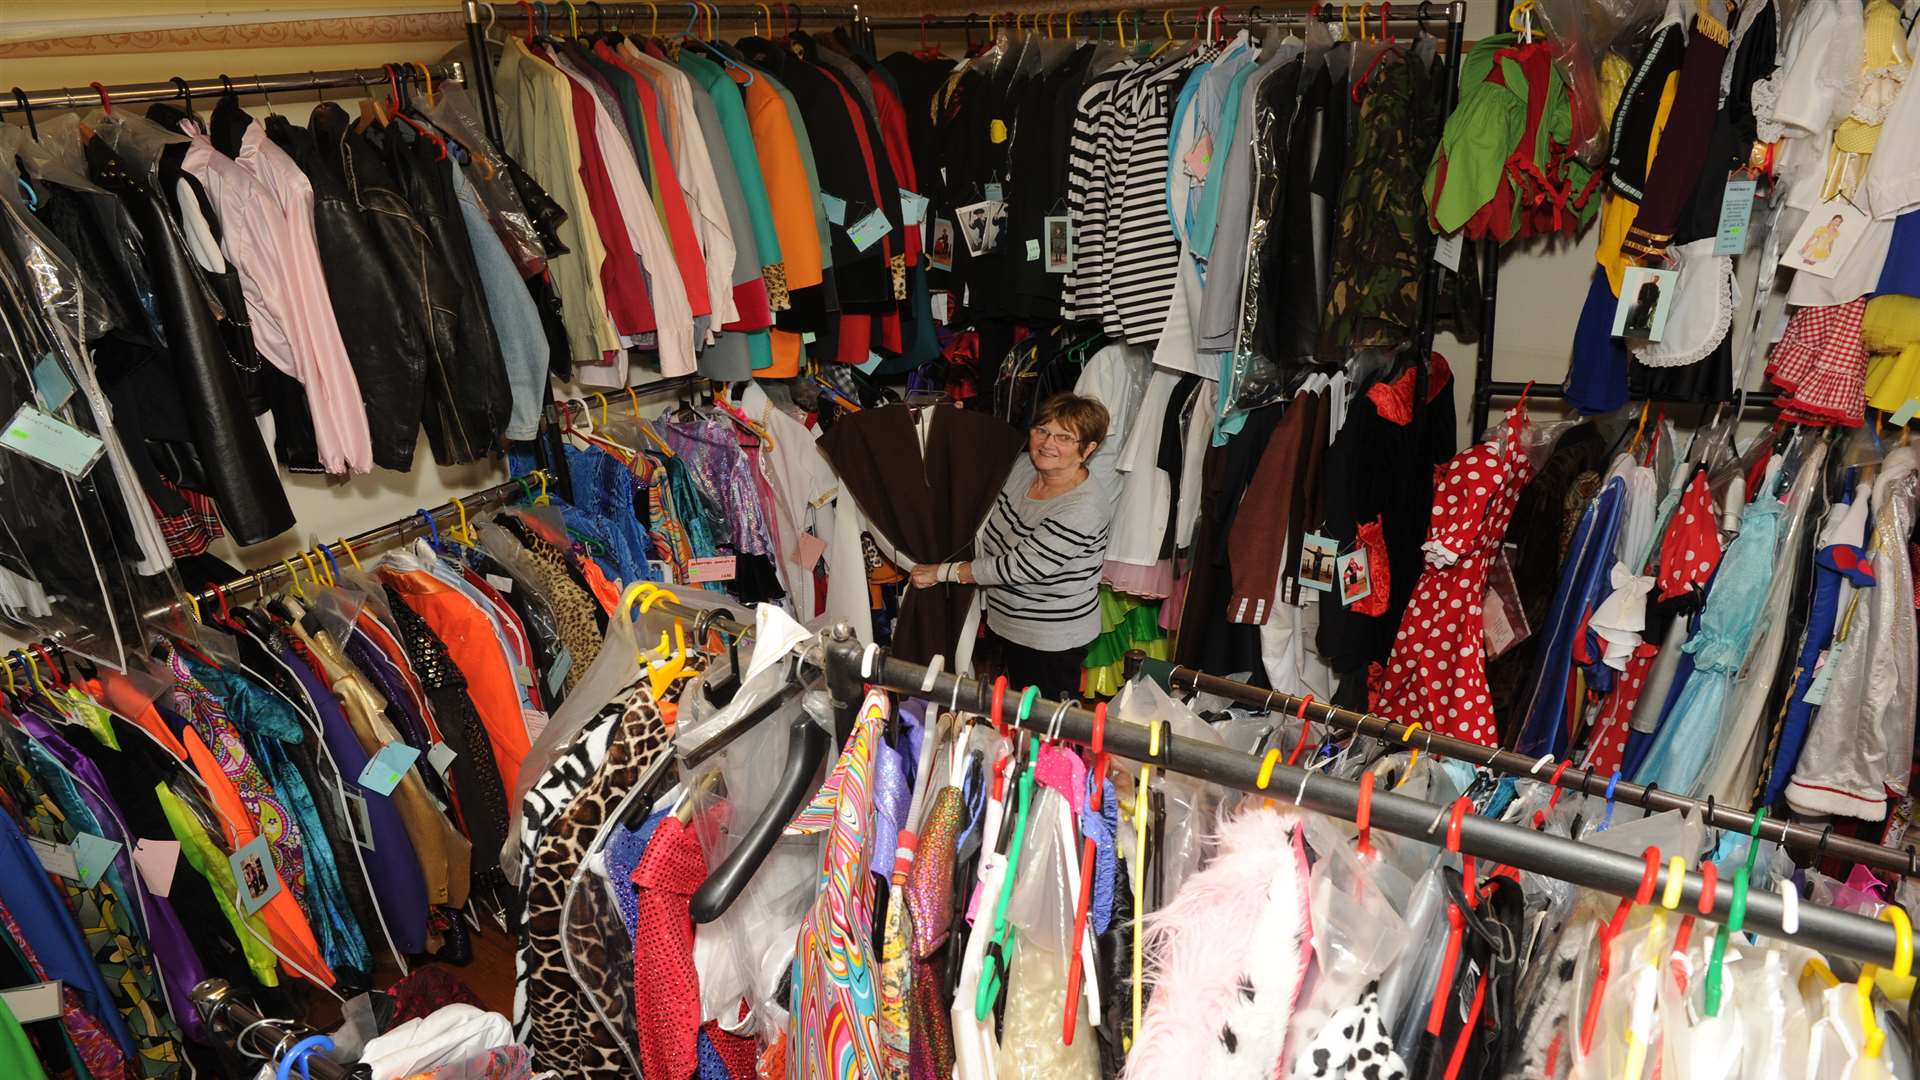 There are 3,000 costumes in the shop which need to be sold before the store closes.